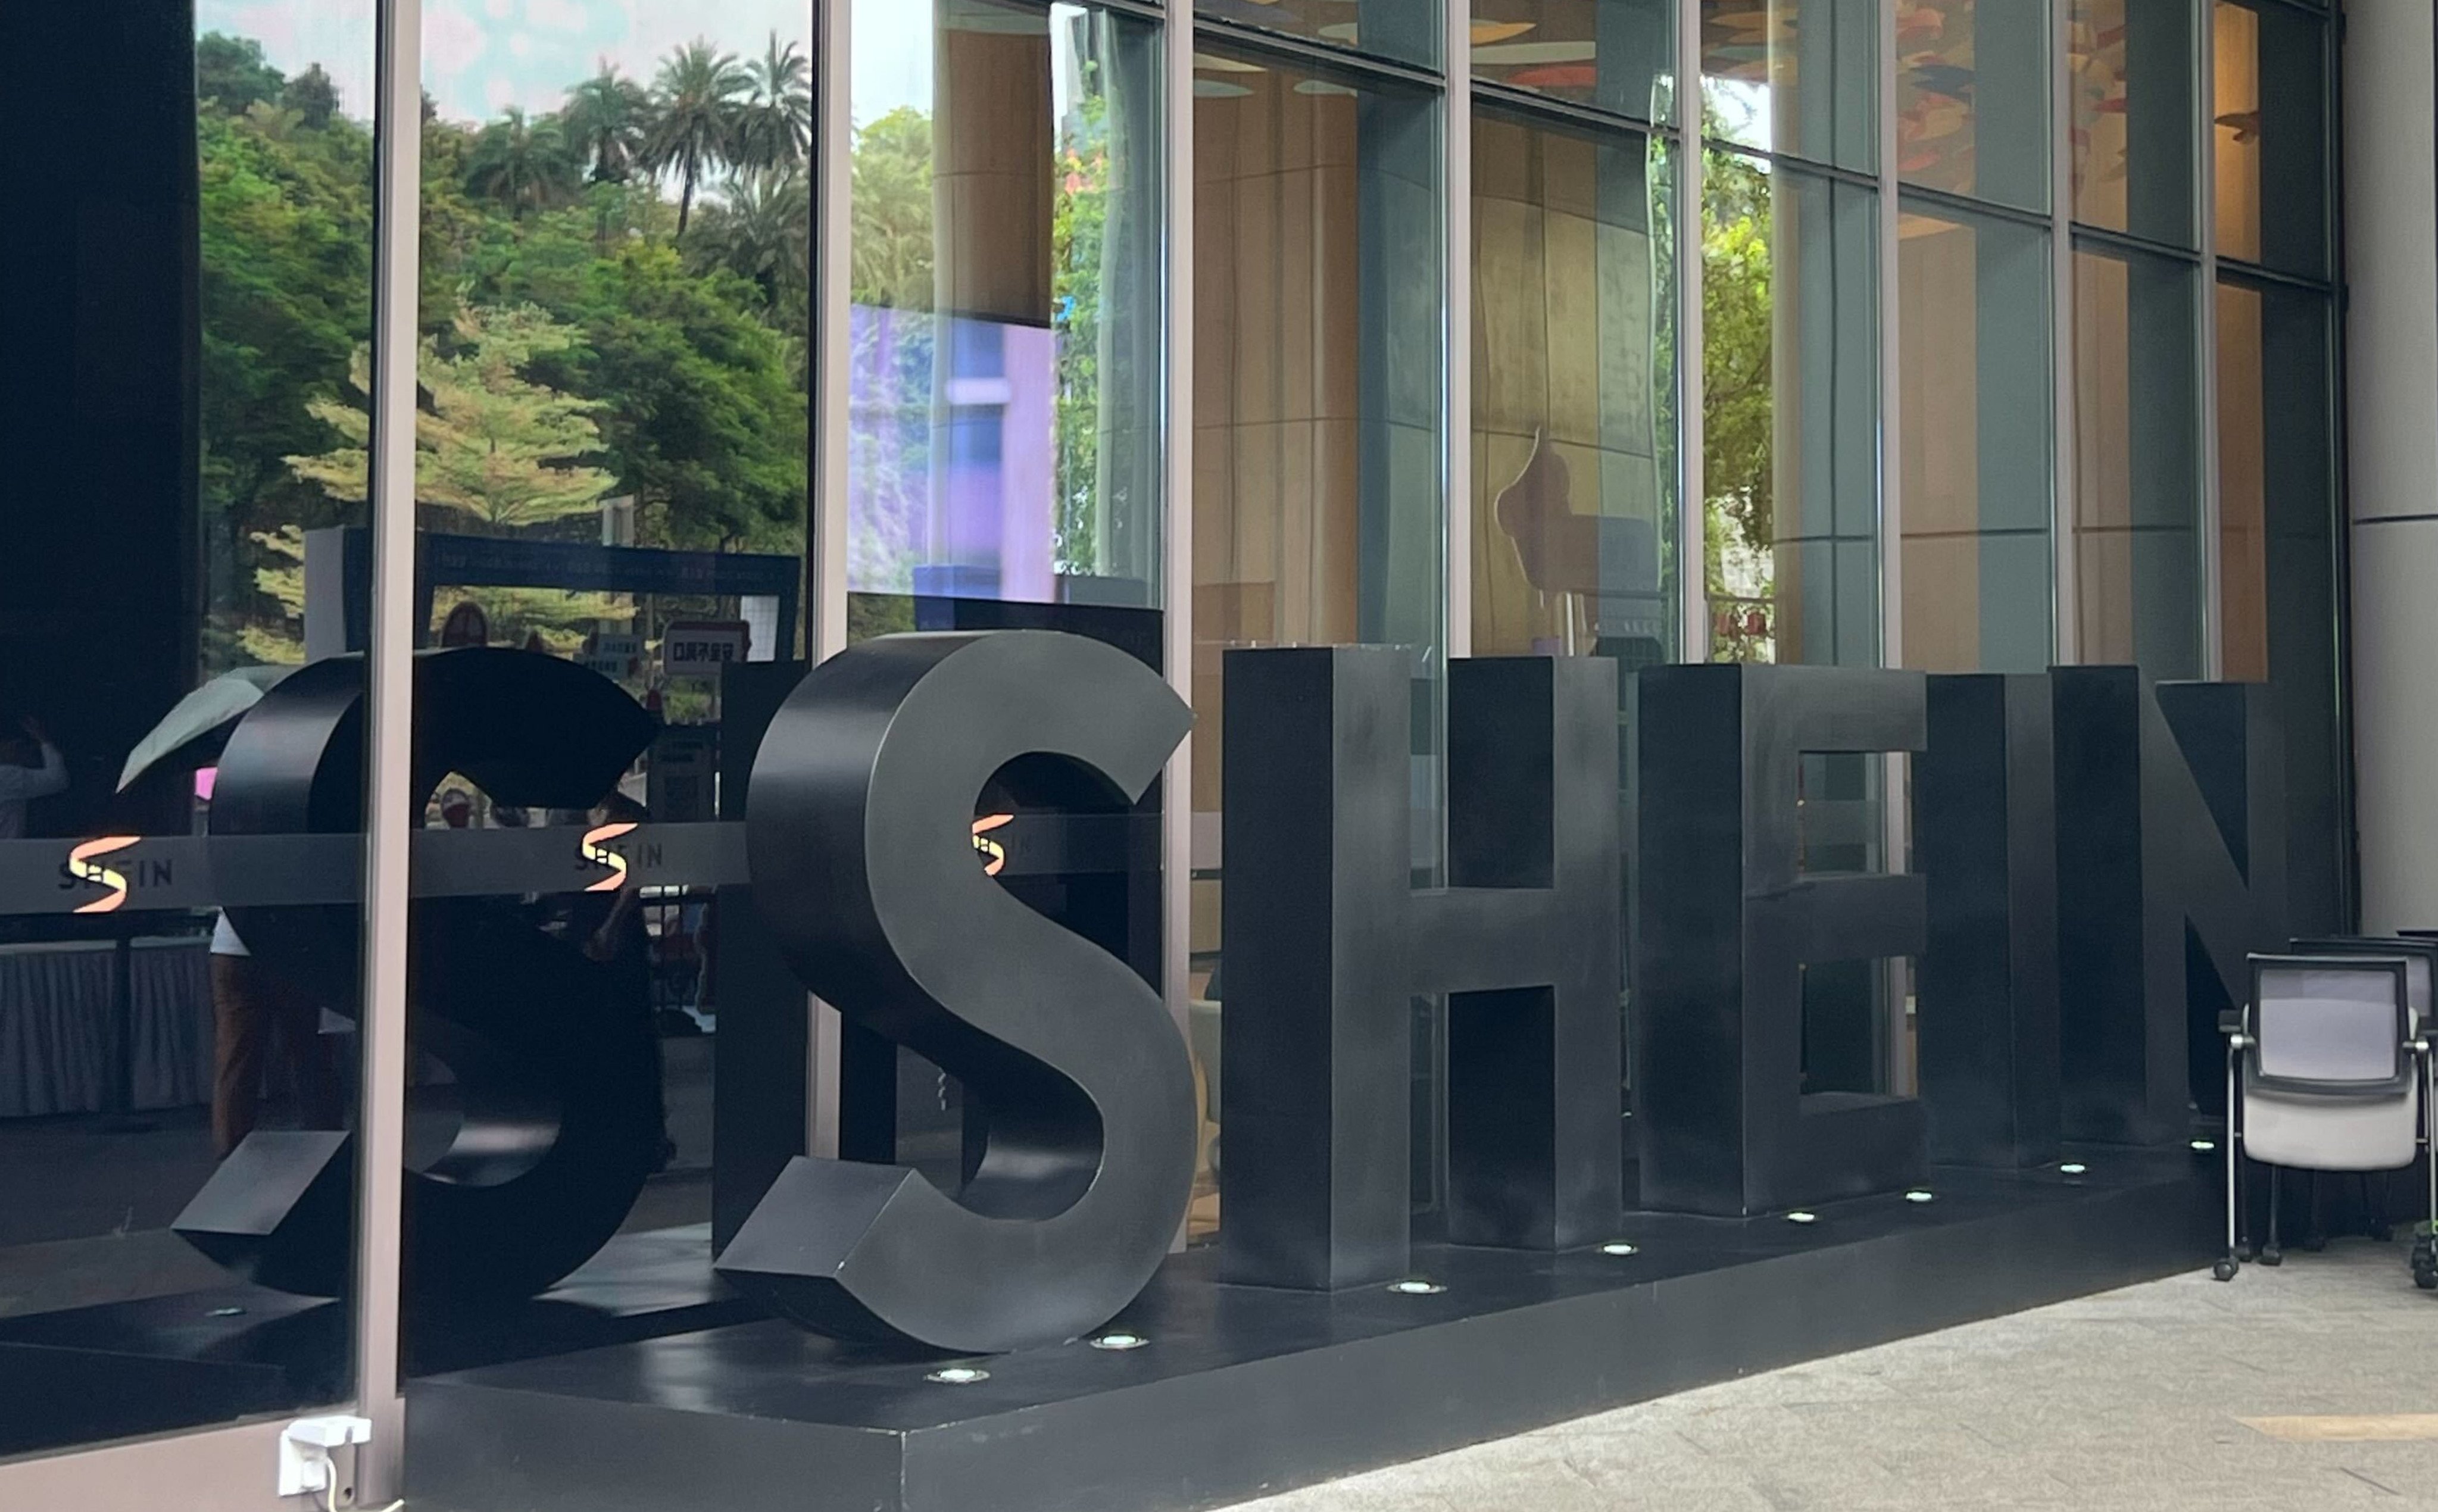 Shein’s office building in the suburbs of Guangzhou, capital of China’s southern Guangdong province. Photo: Iris Deng